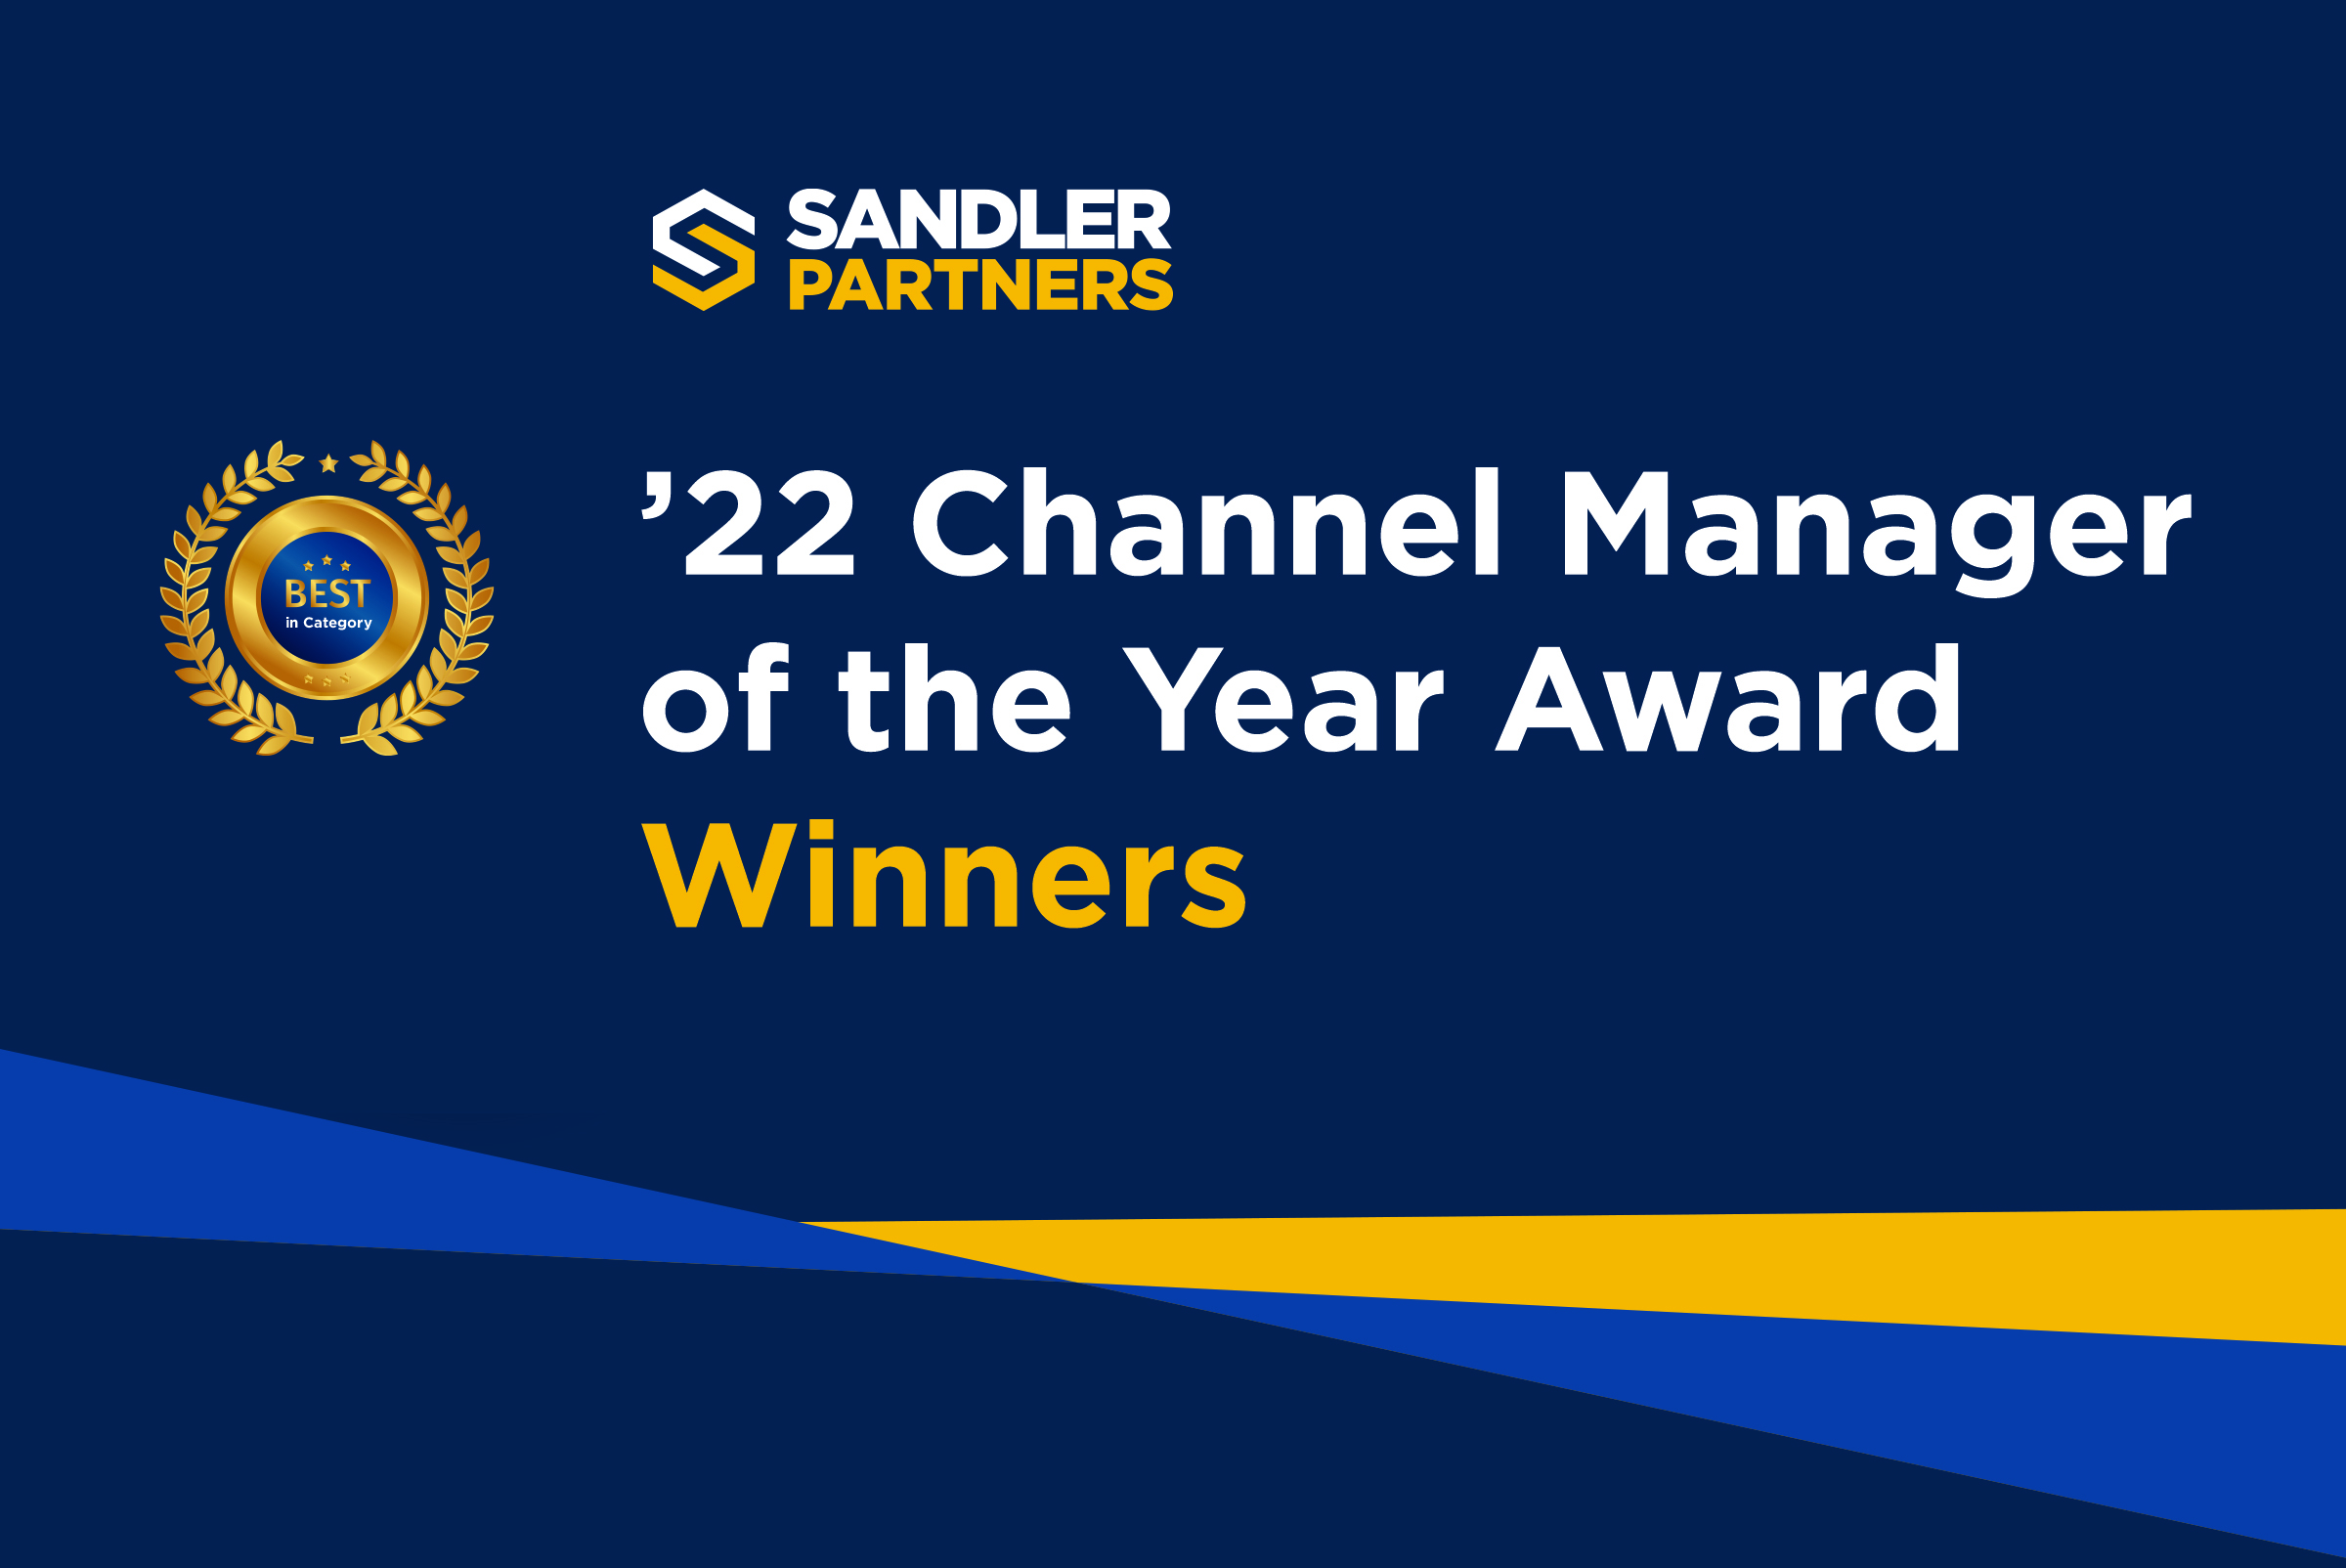 Sandler Partners 2022 Channel Manager of the Year Award Winners